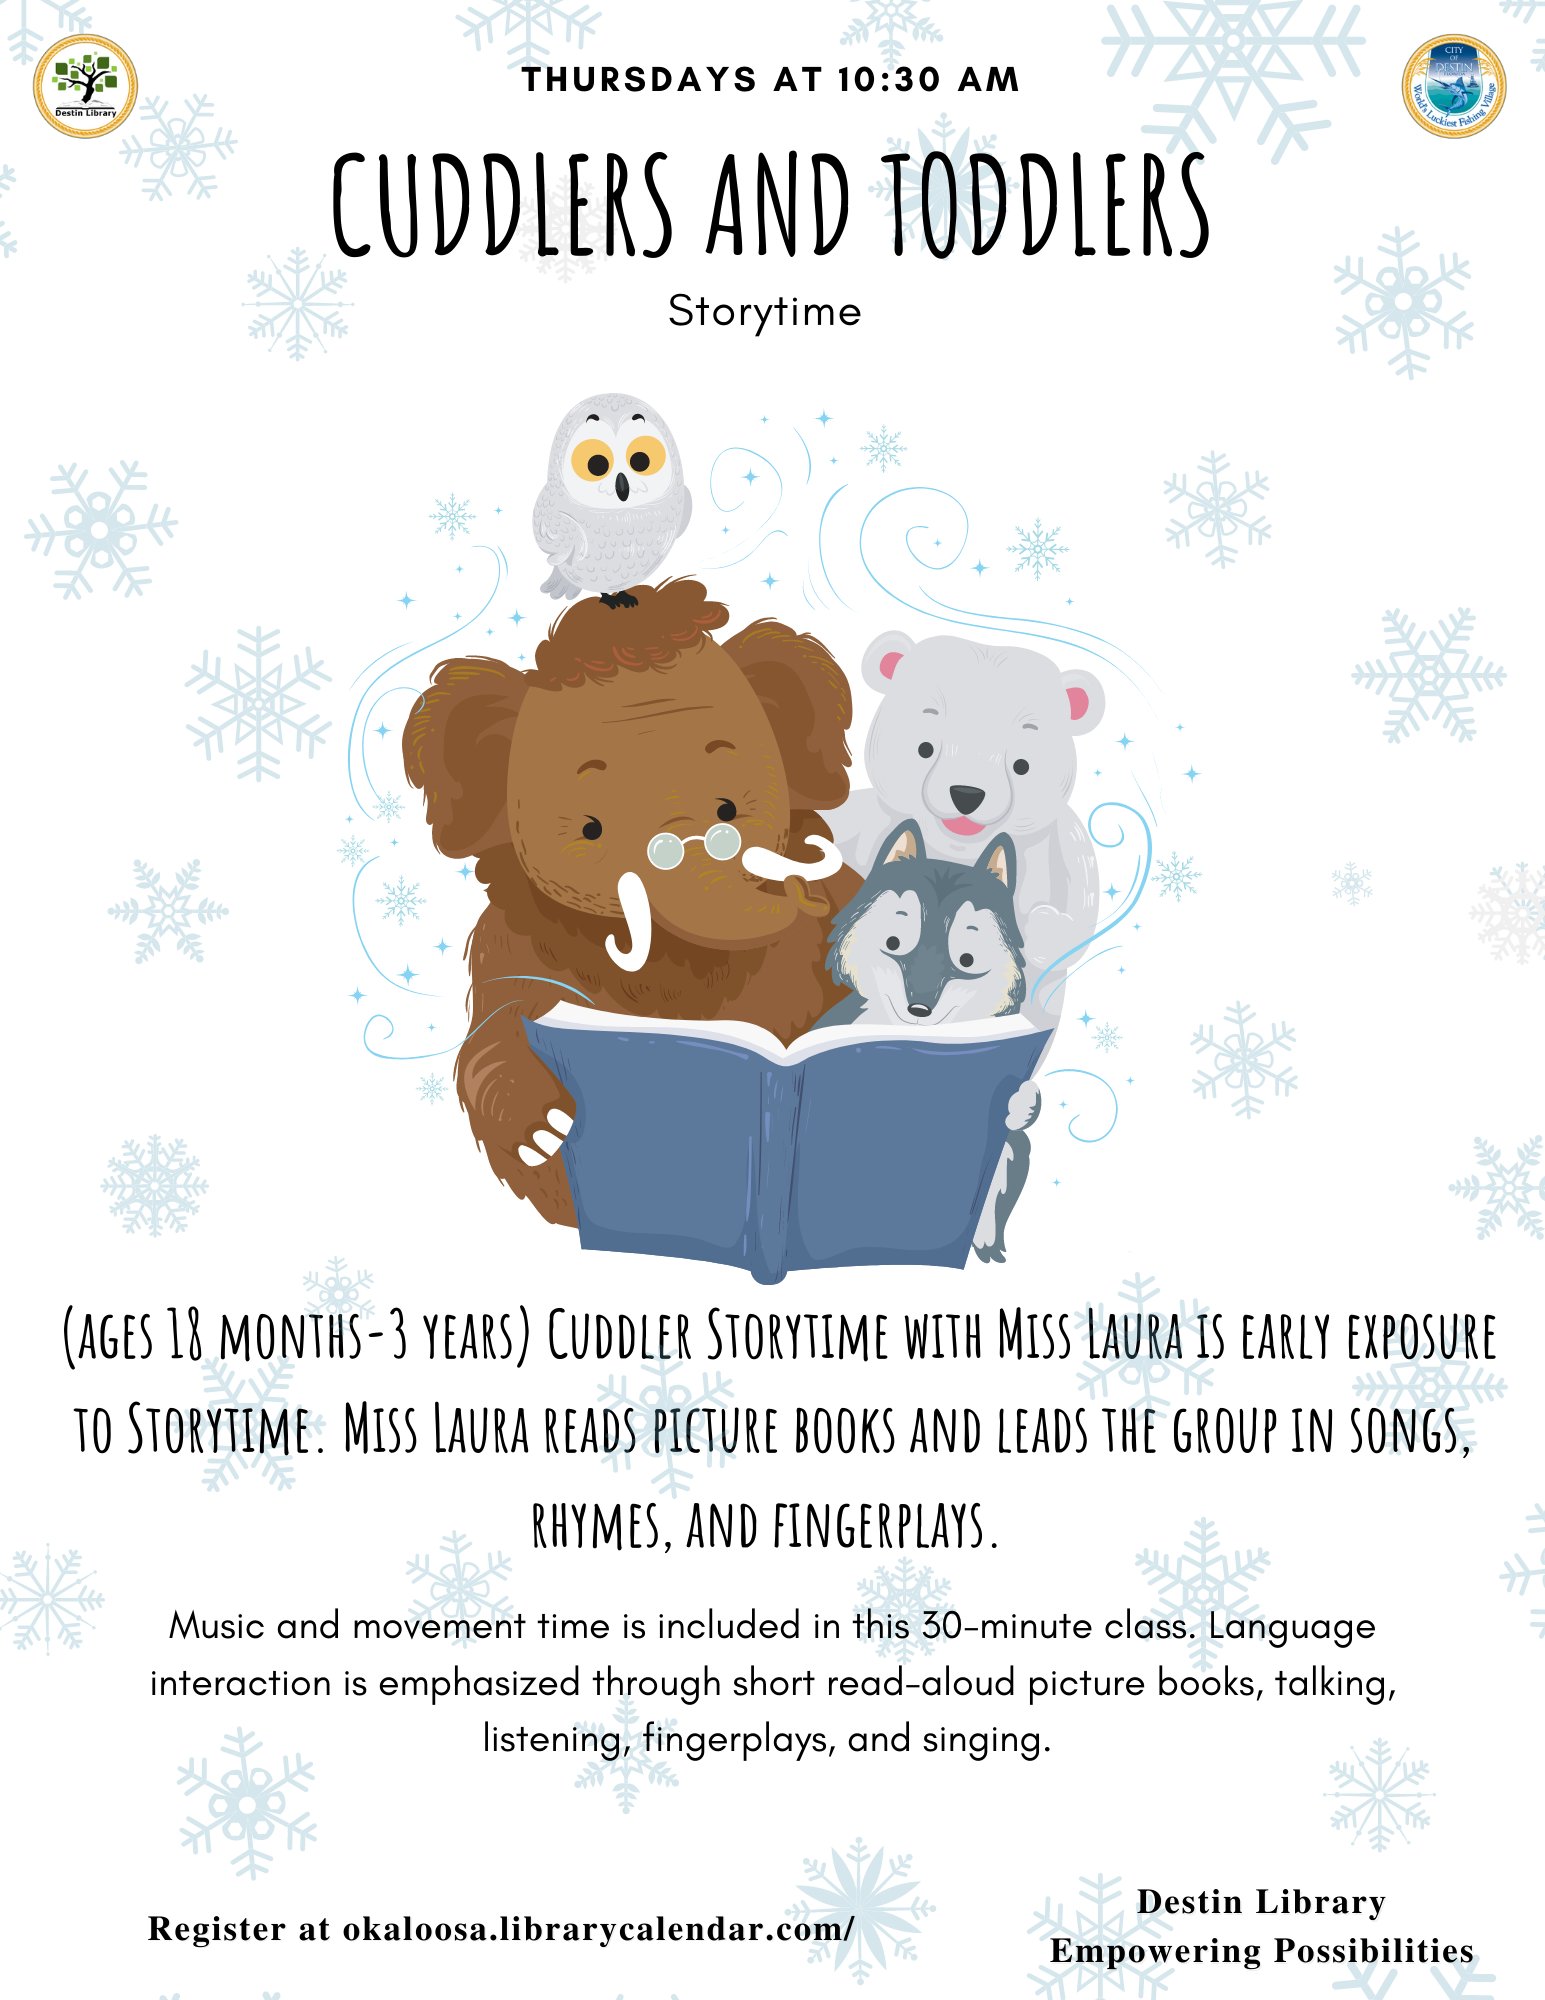 Cuddlers and Toddlers Storytime: Thursdays at 10:30